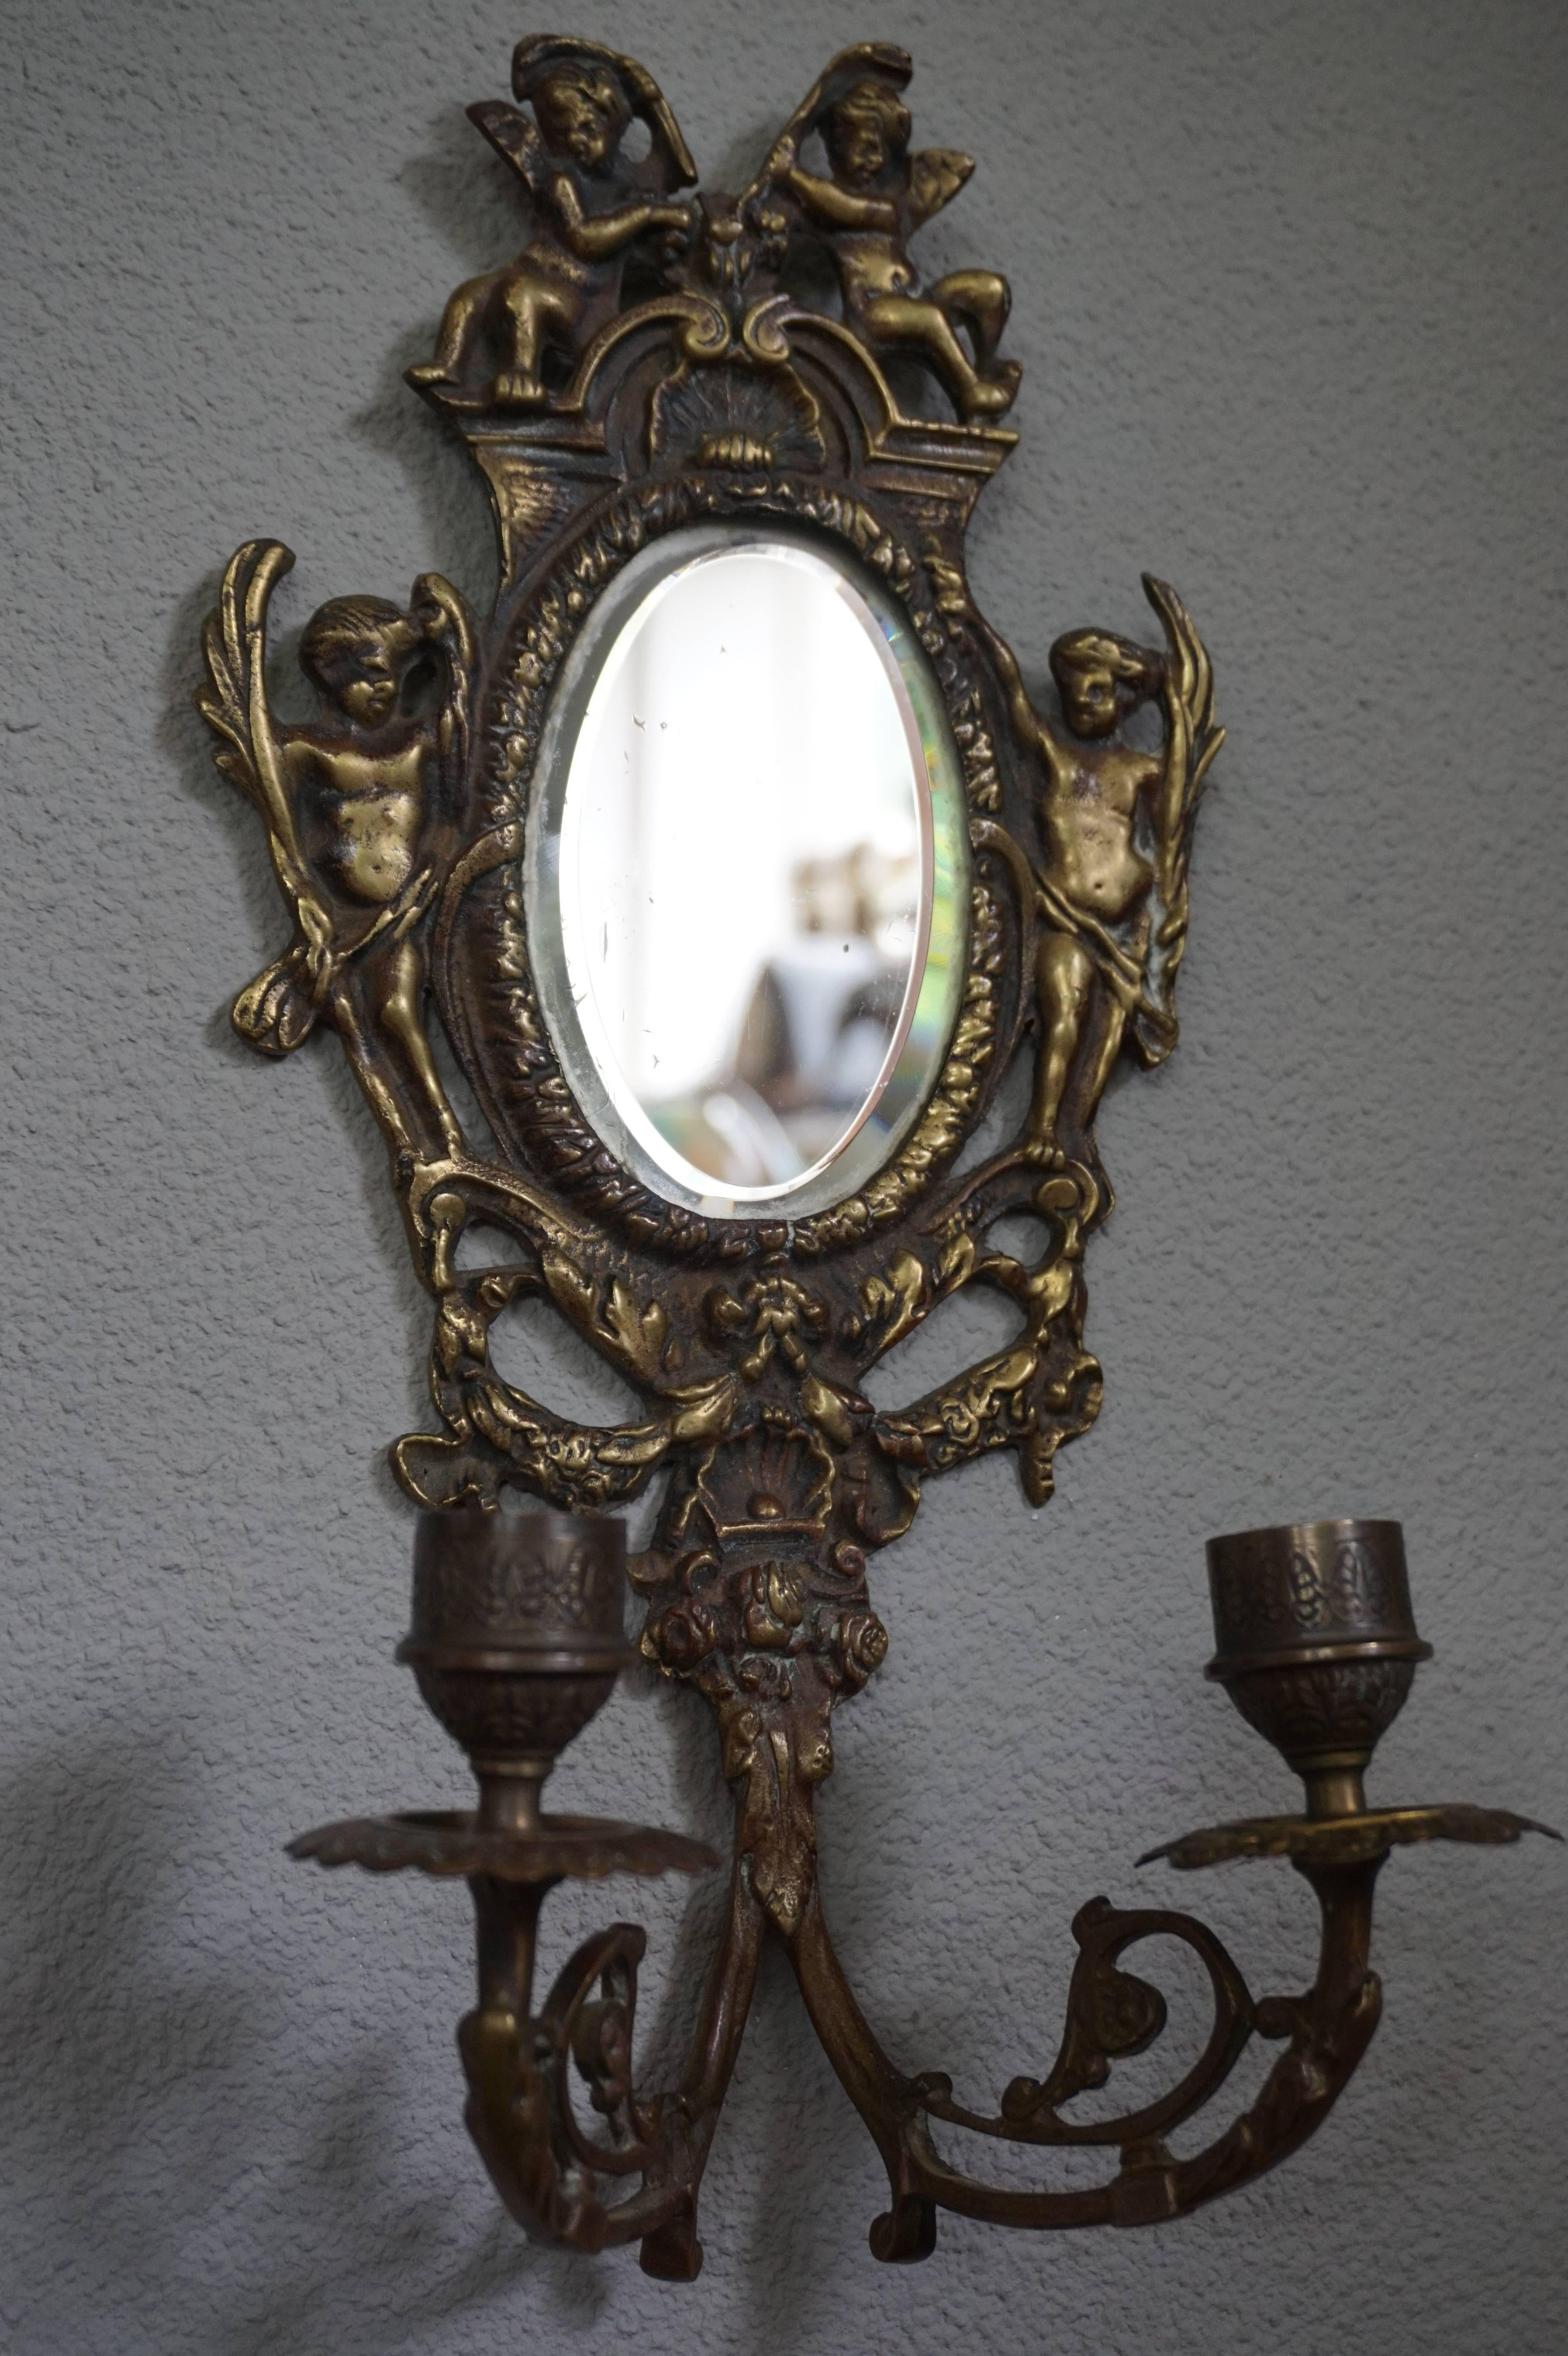 Renaissance Revival Antique Pair of Cast Bronze Wall Sconces / Candelabras with Oval Beveled Mirrors